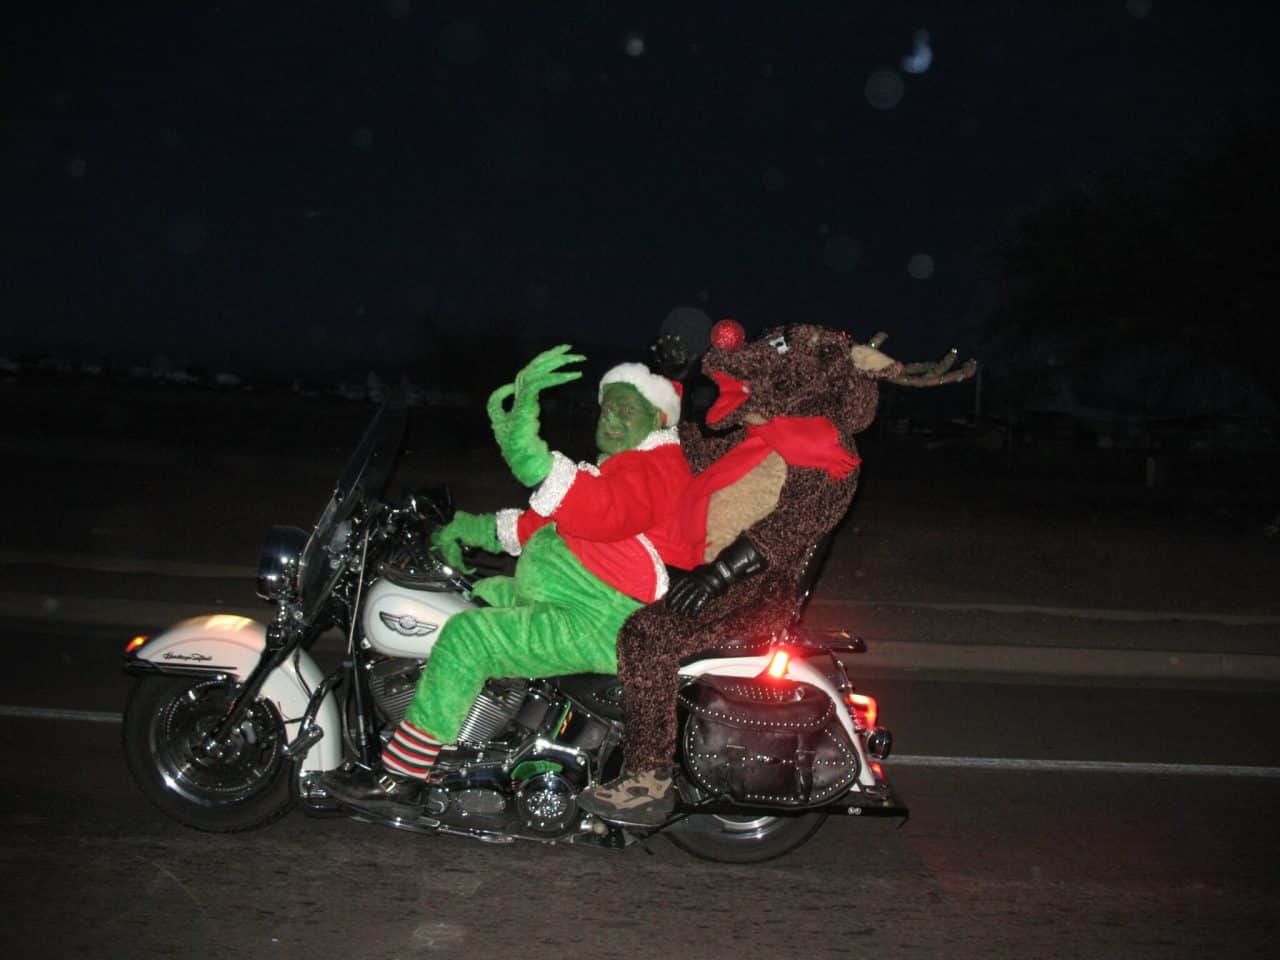 Person dressed up as the Grinch on a motorcycle with a passenger dressed as a Rudolph the red nosed reindeer